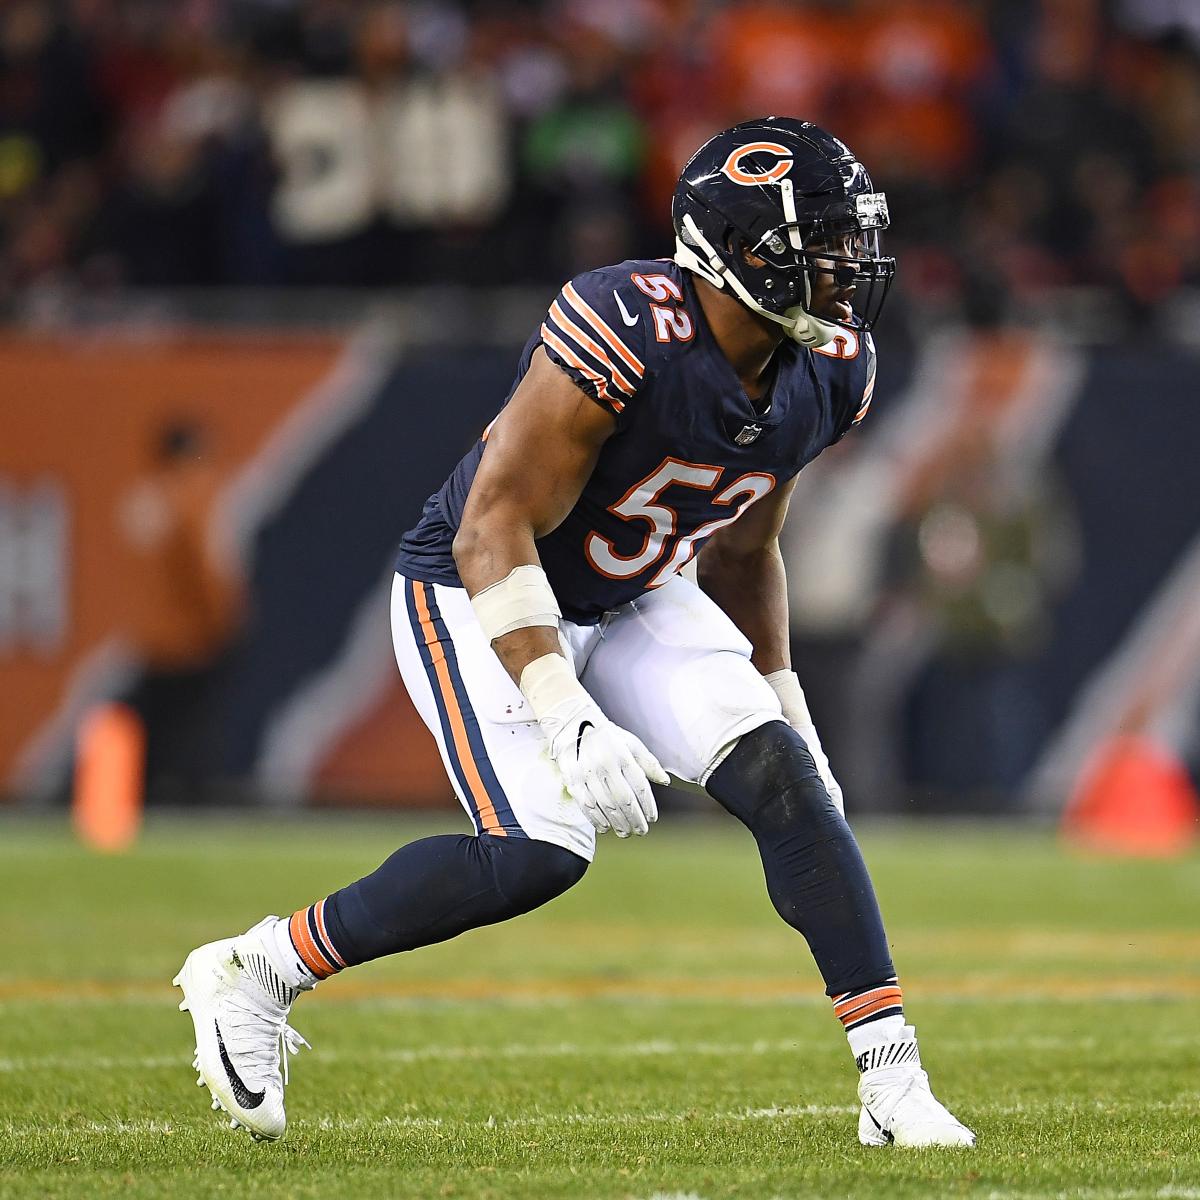 Bears' Khalil Mack Reveals His Goal Is to Be 'Best to Play the Game